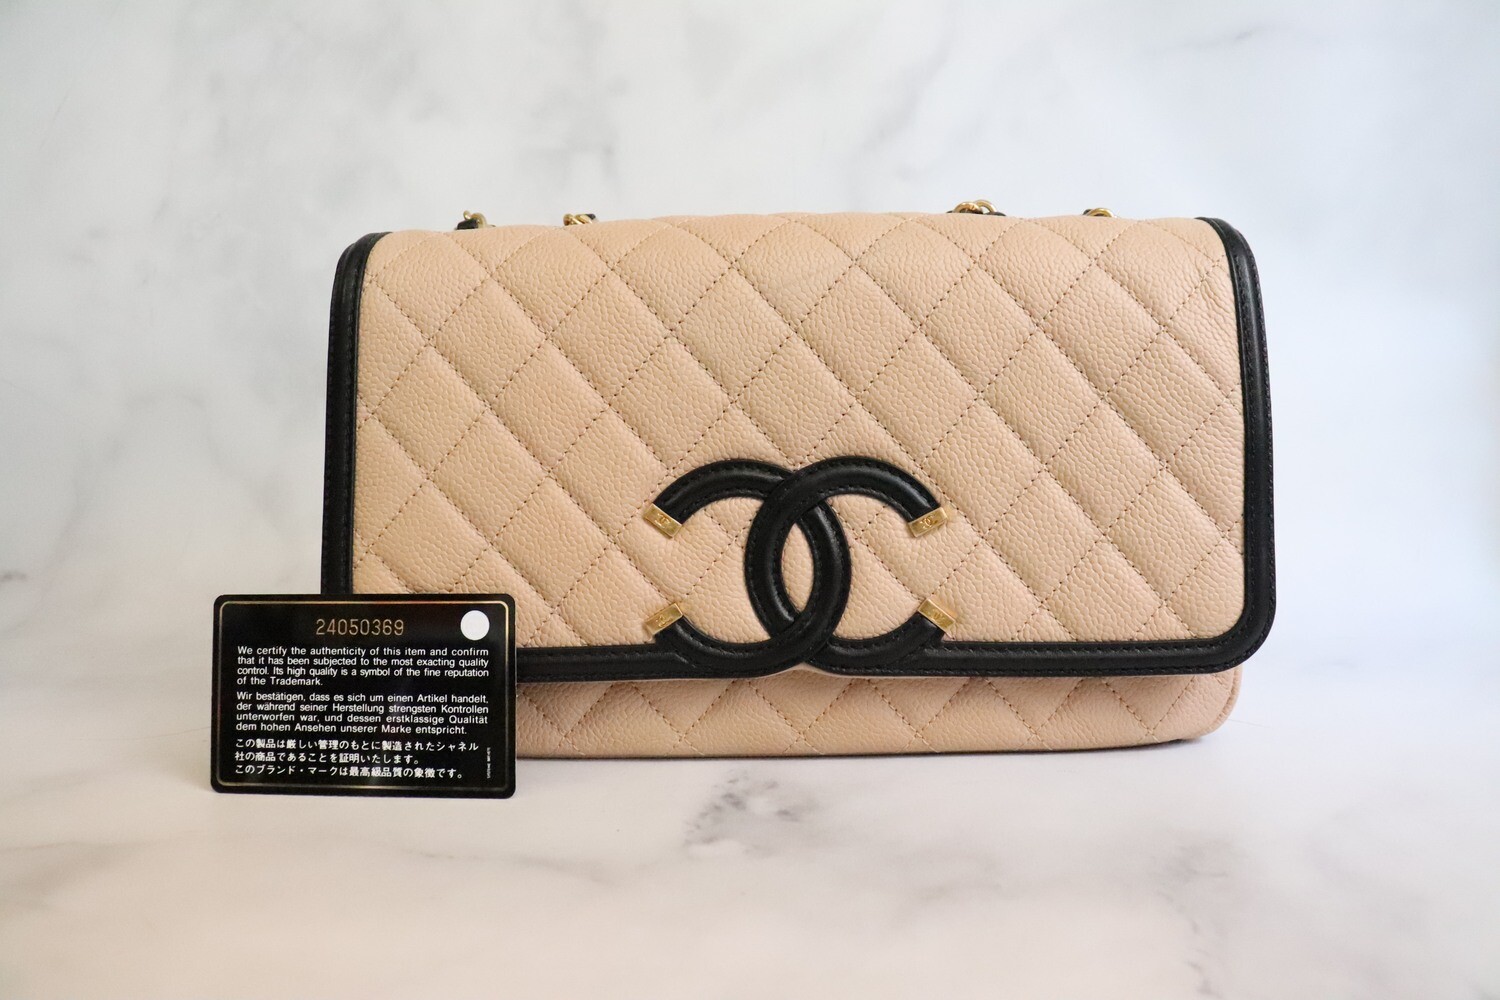 Chanel Vanity Filigree Medium, Beige Caviar Leather, Brushed Gold Hardware,  Preowned in Dustbag